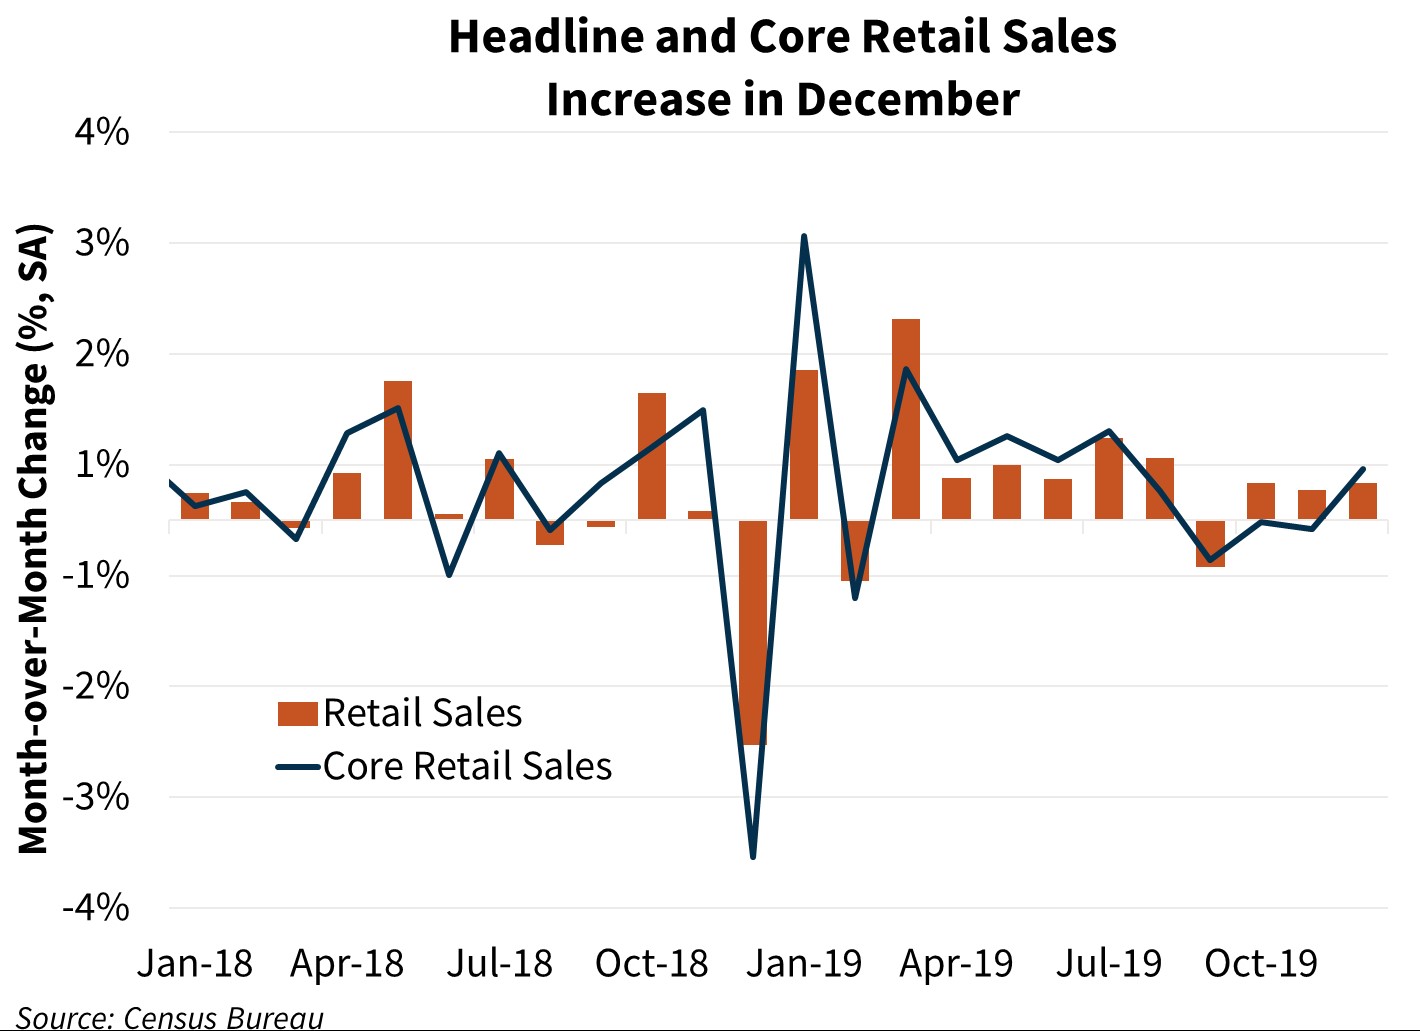 Headline and Core Retail Sales Increase in December